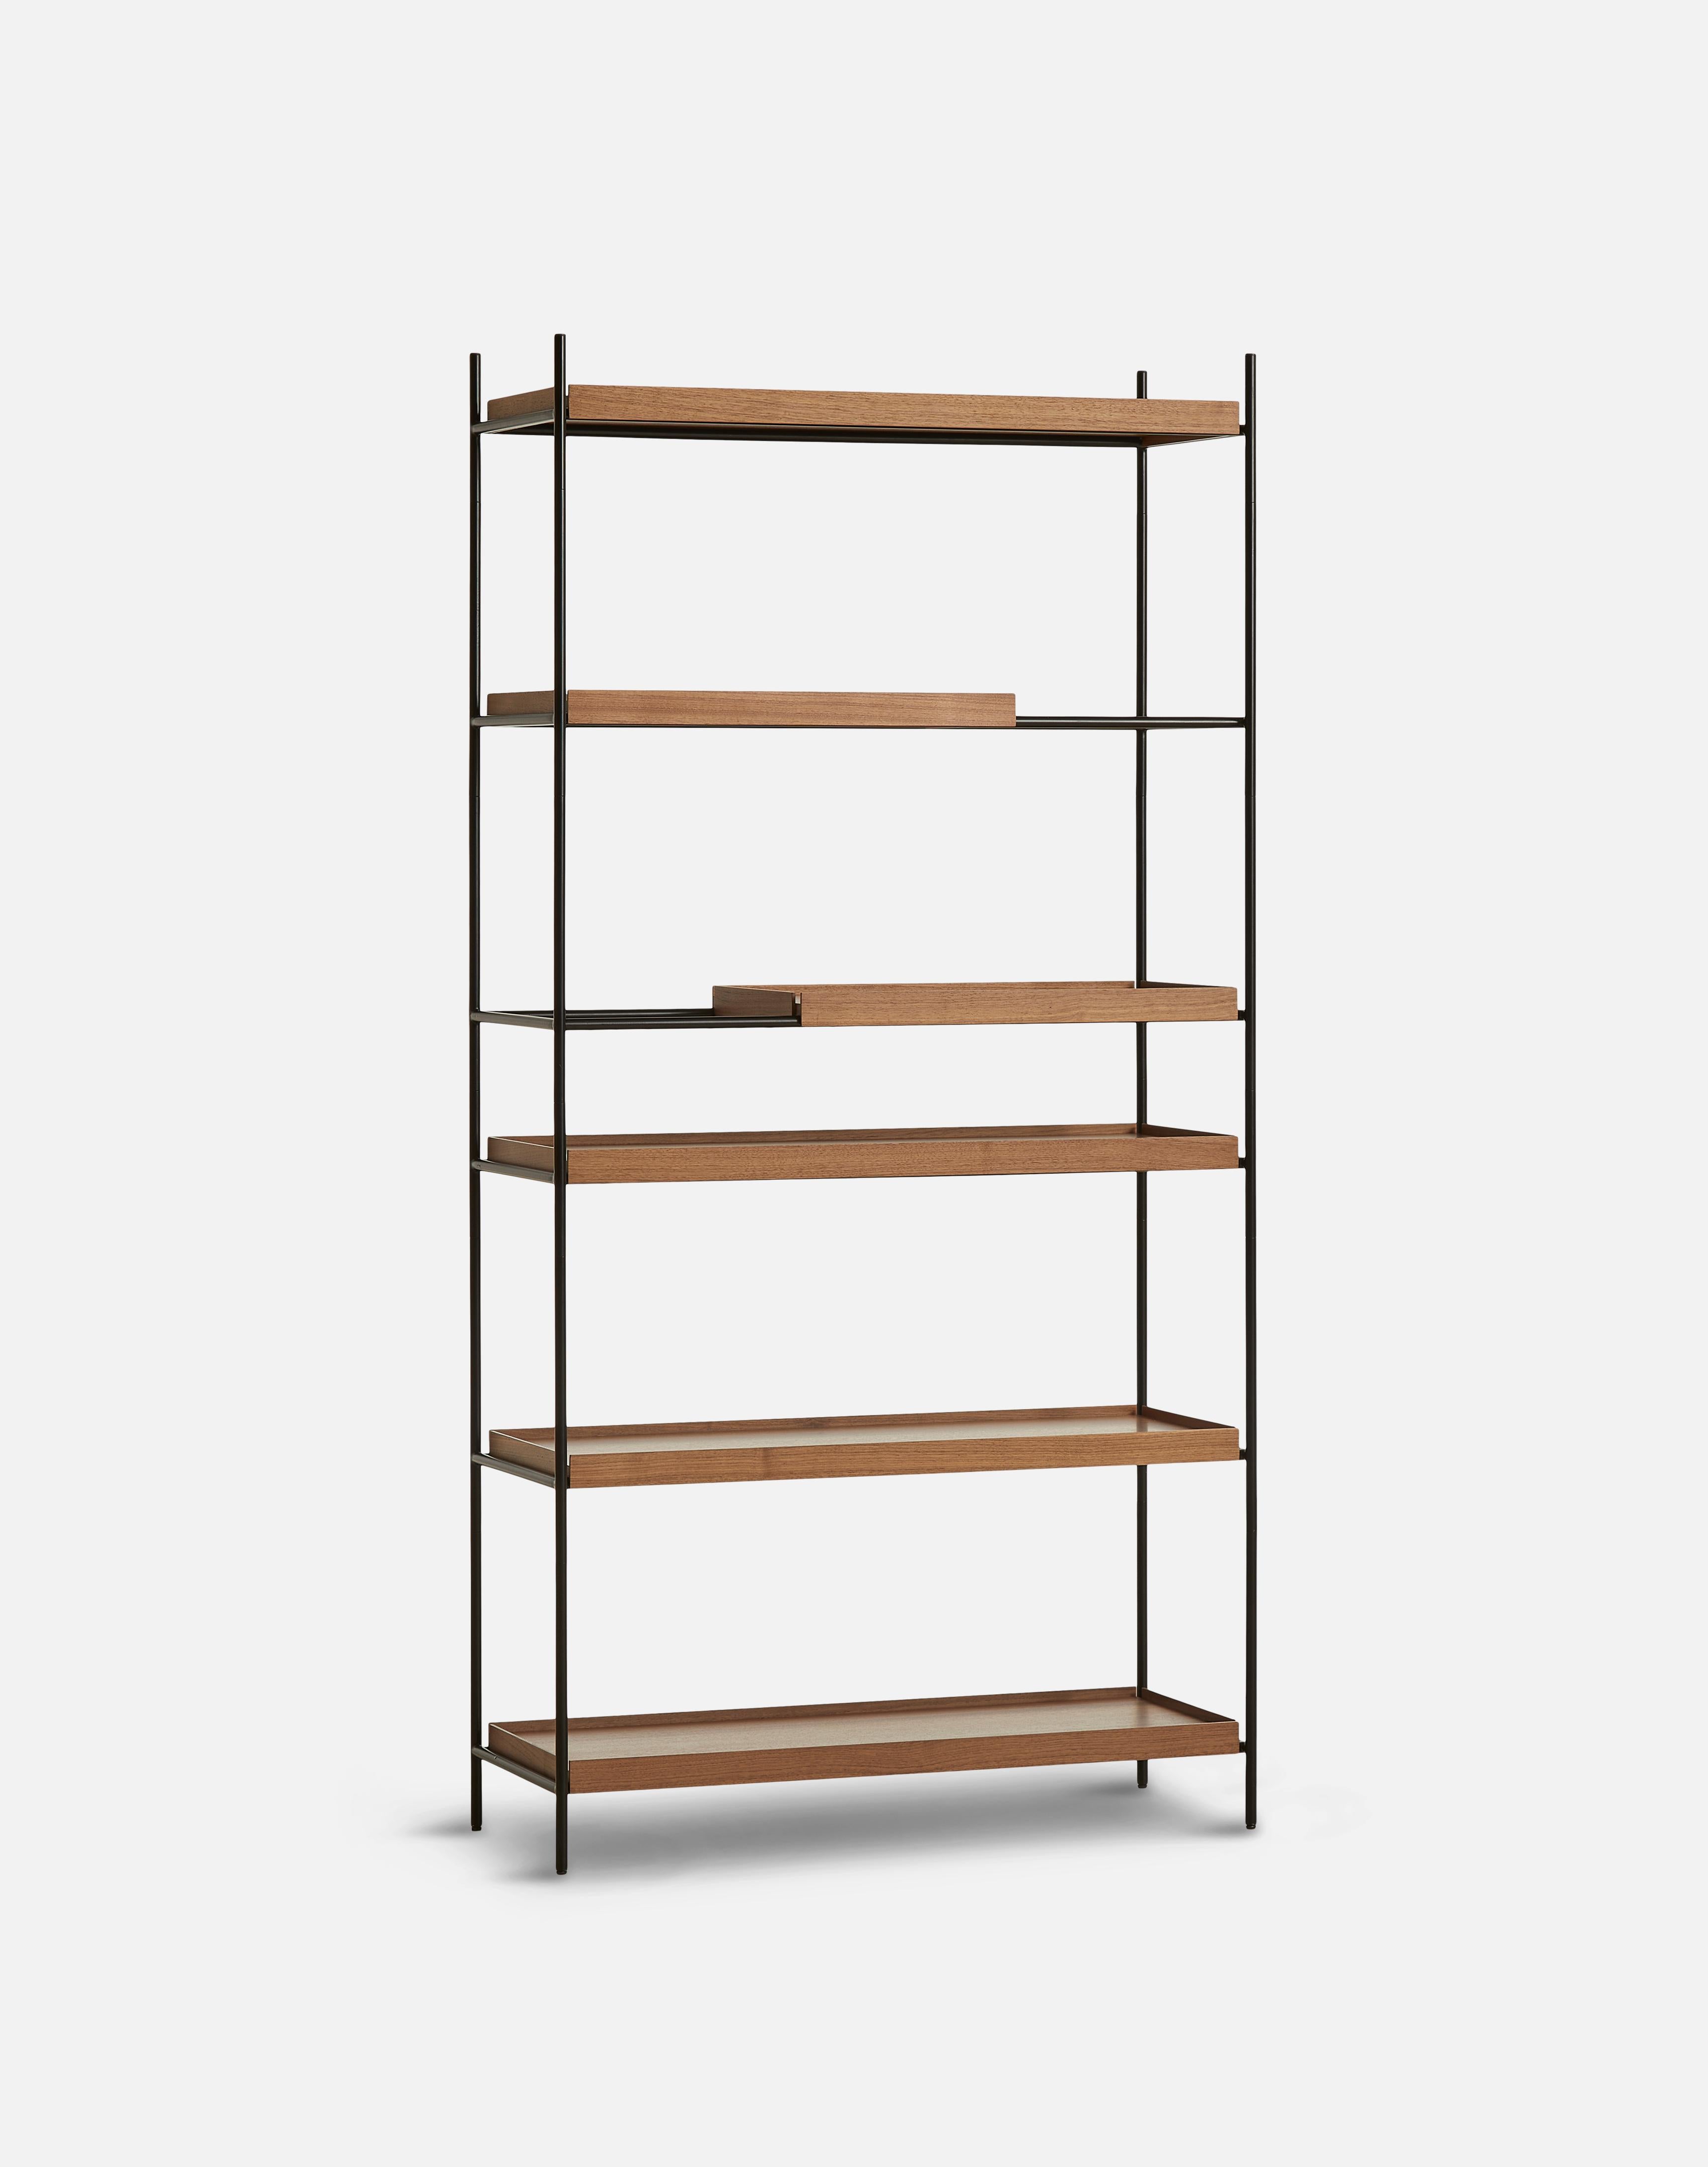 High walnut tray shelf by Hanne Willmann
Materials: Metal, walnut.
Dimensions: D 40 x W 100 x H 201 cm
Also available in different tray conbinations and 2 sizes: H81, H 201 cm.

Hanne Willmann is a dynamic German designer with her own